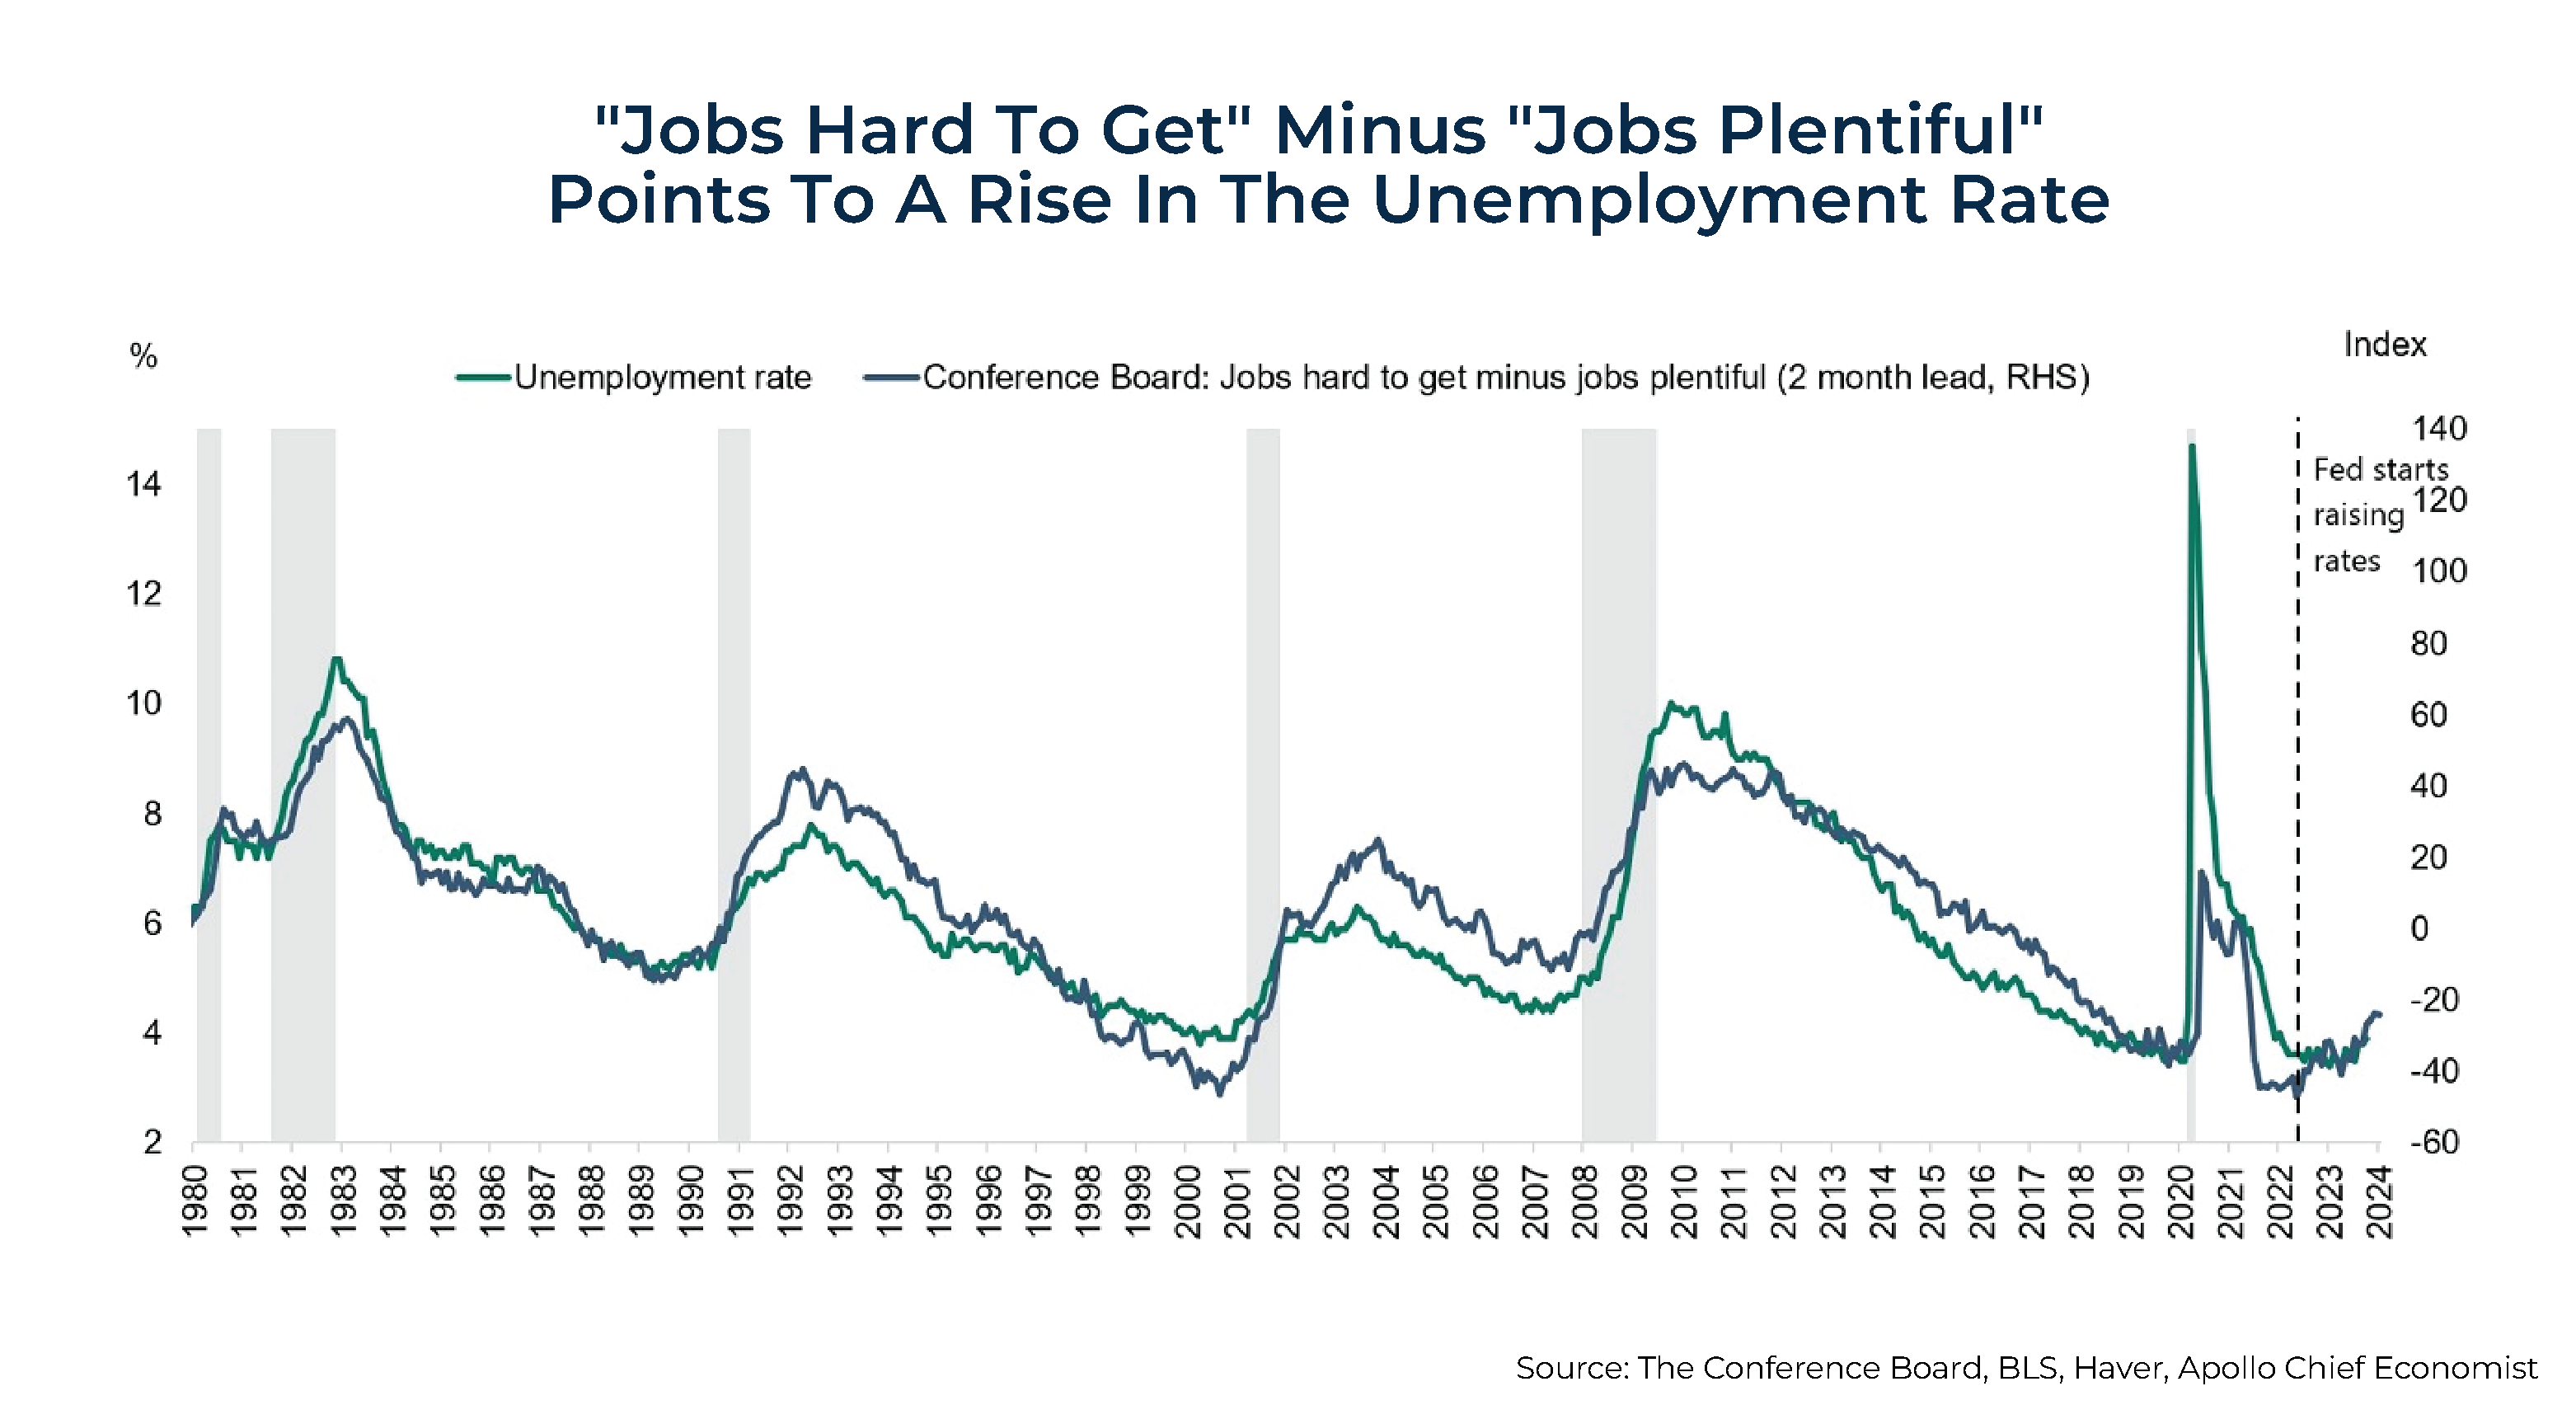 Jobs Hard To Get Minus Jobs Plentiful Points To A Rise In The Unemployment Rate